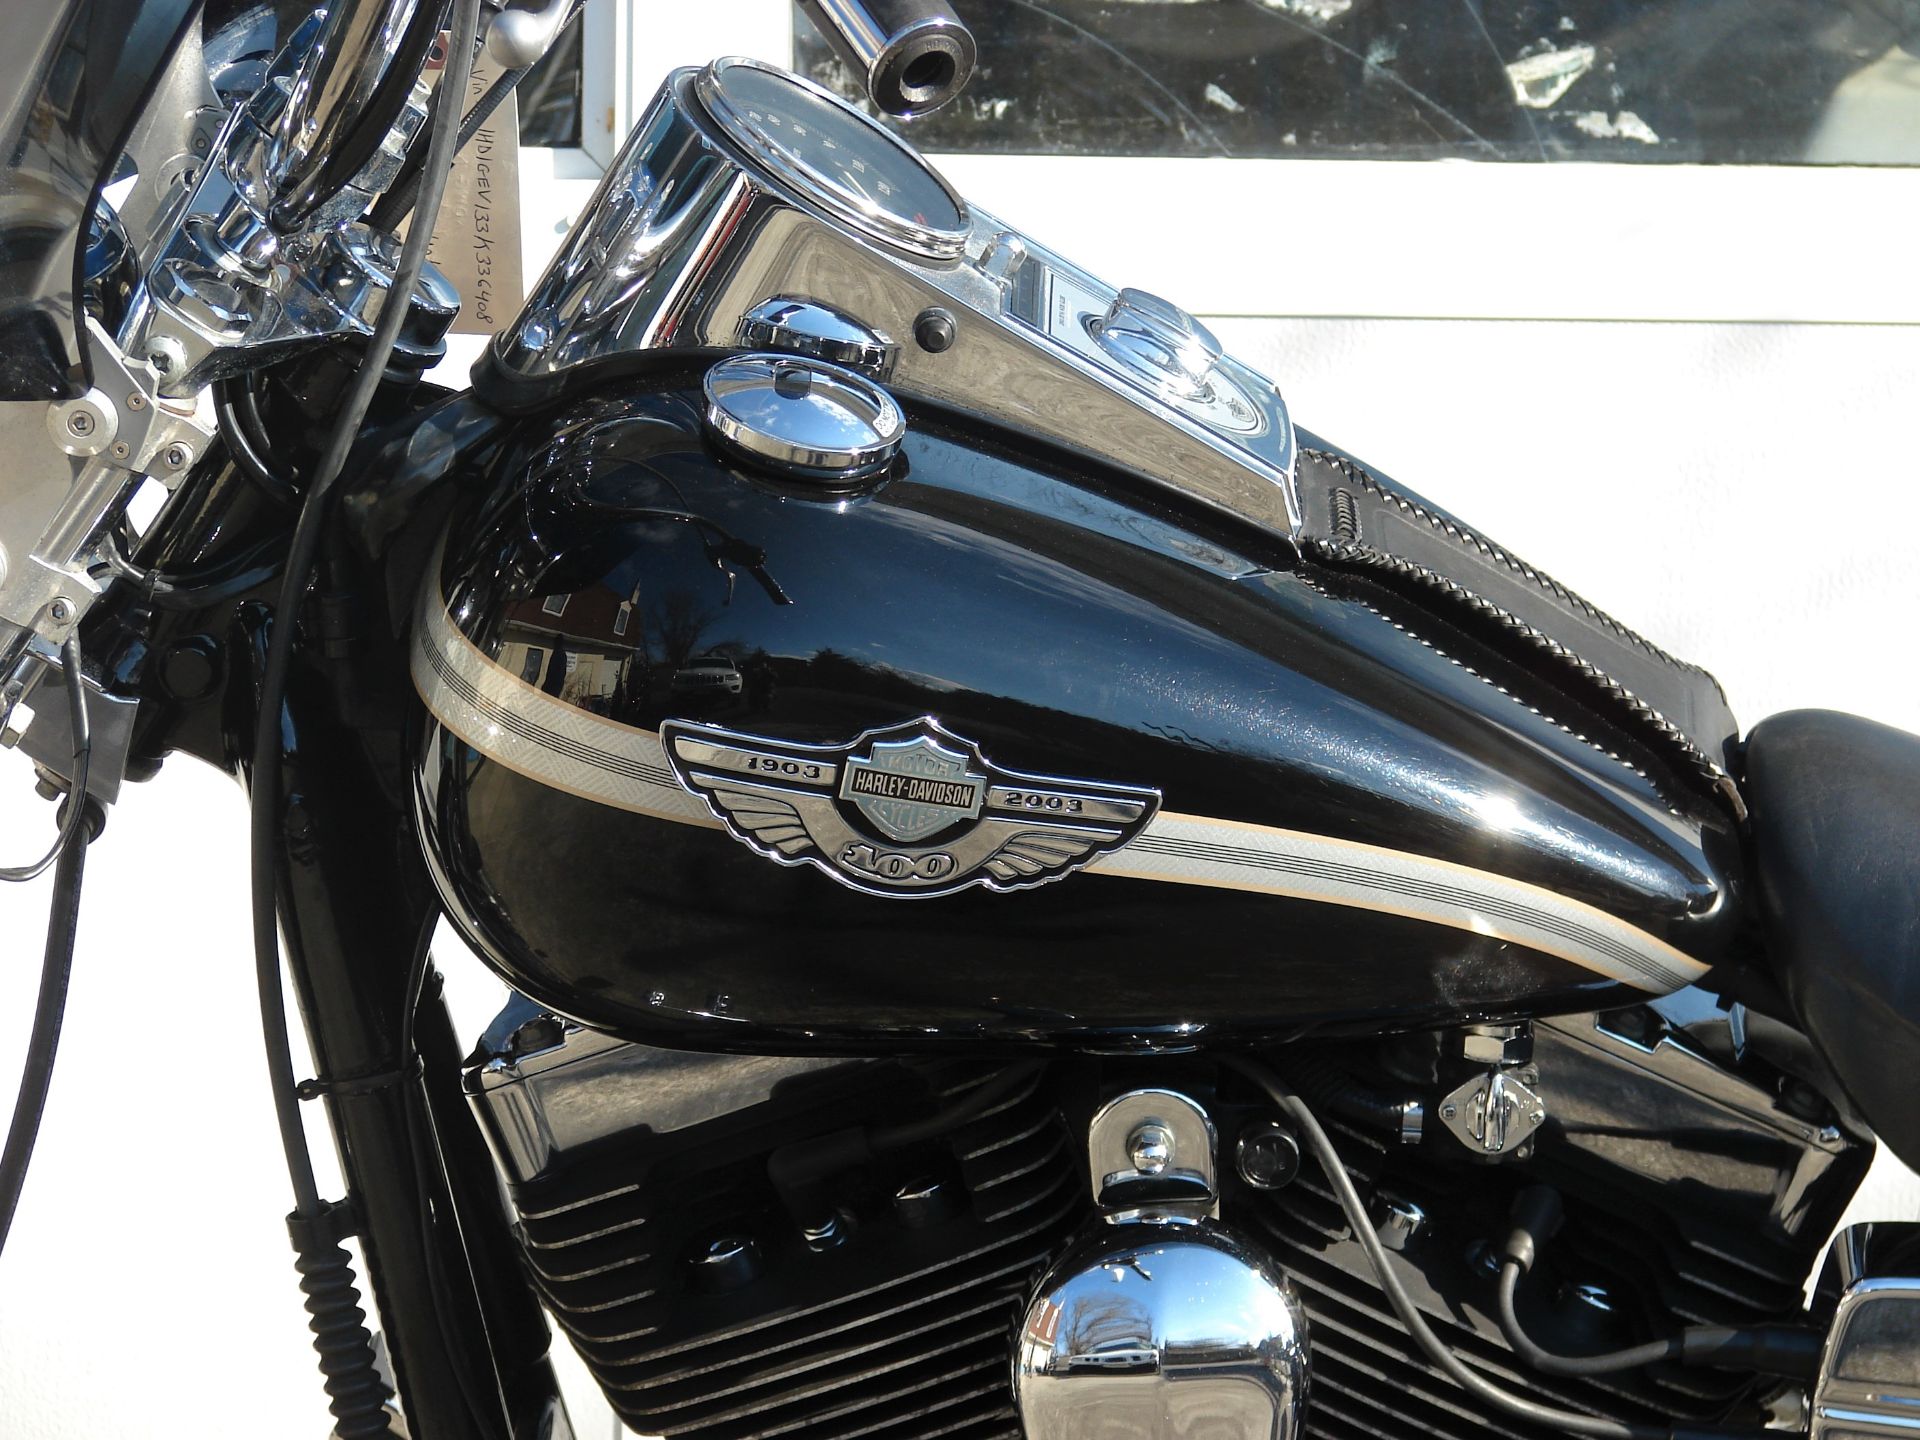 2003 Harley-Davidson FXDWG Dyna Wide Glide in Williamstown, New Jersey - Photo 16